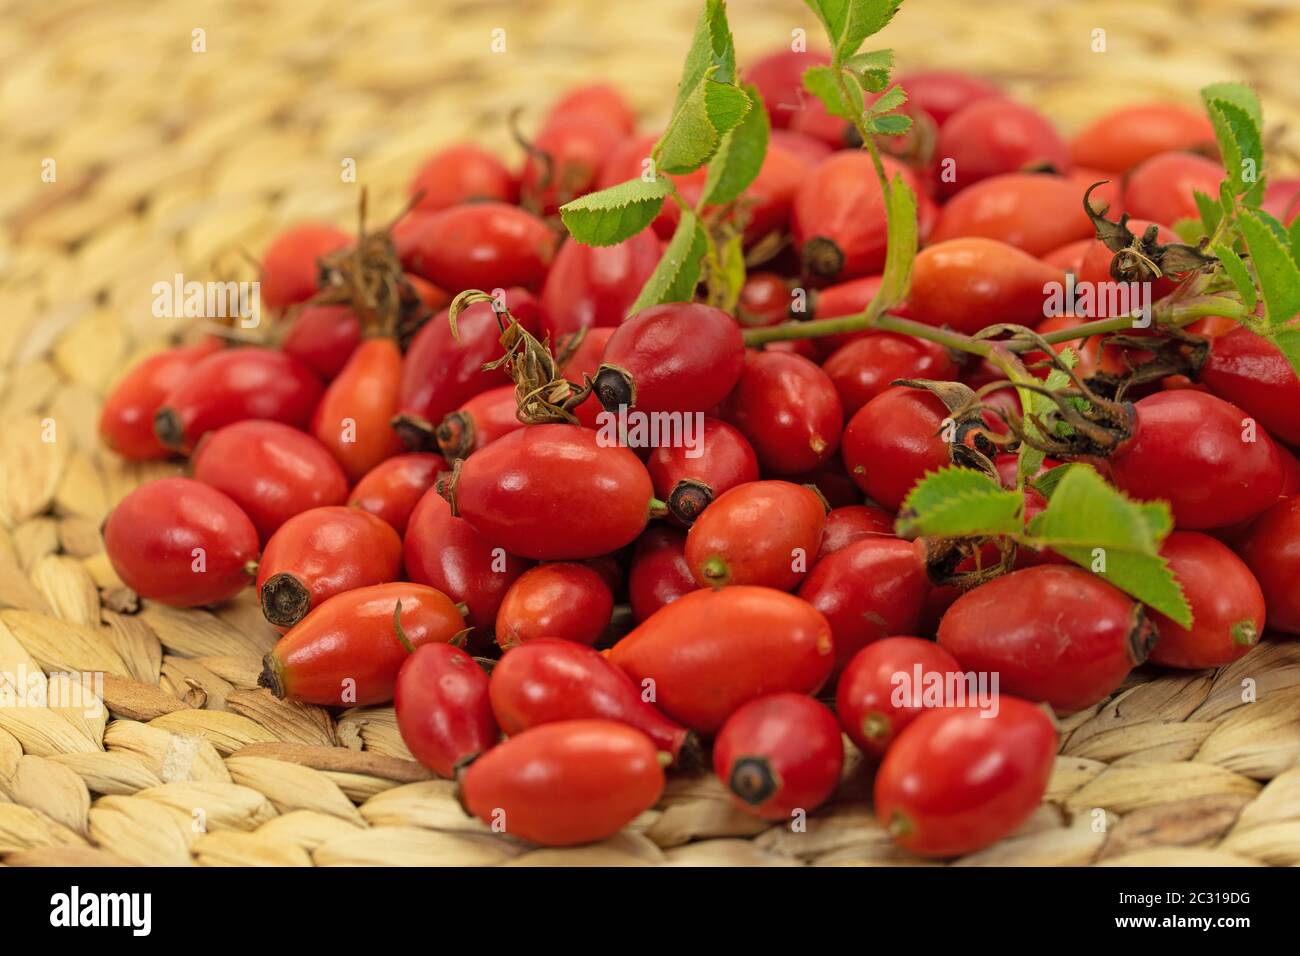 Ripe harvested rose hips on a bast bowl Stock Photo